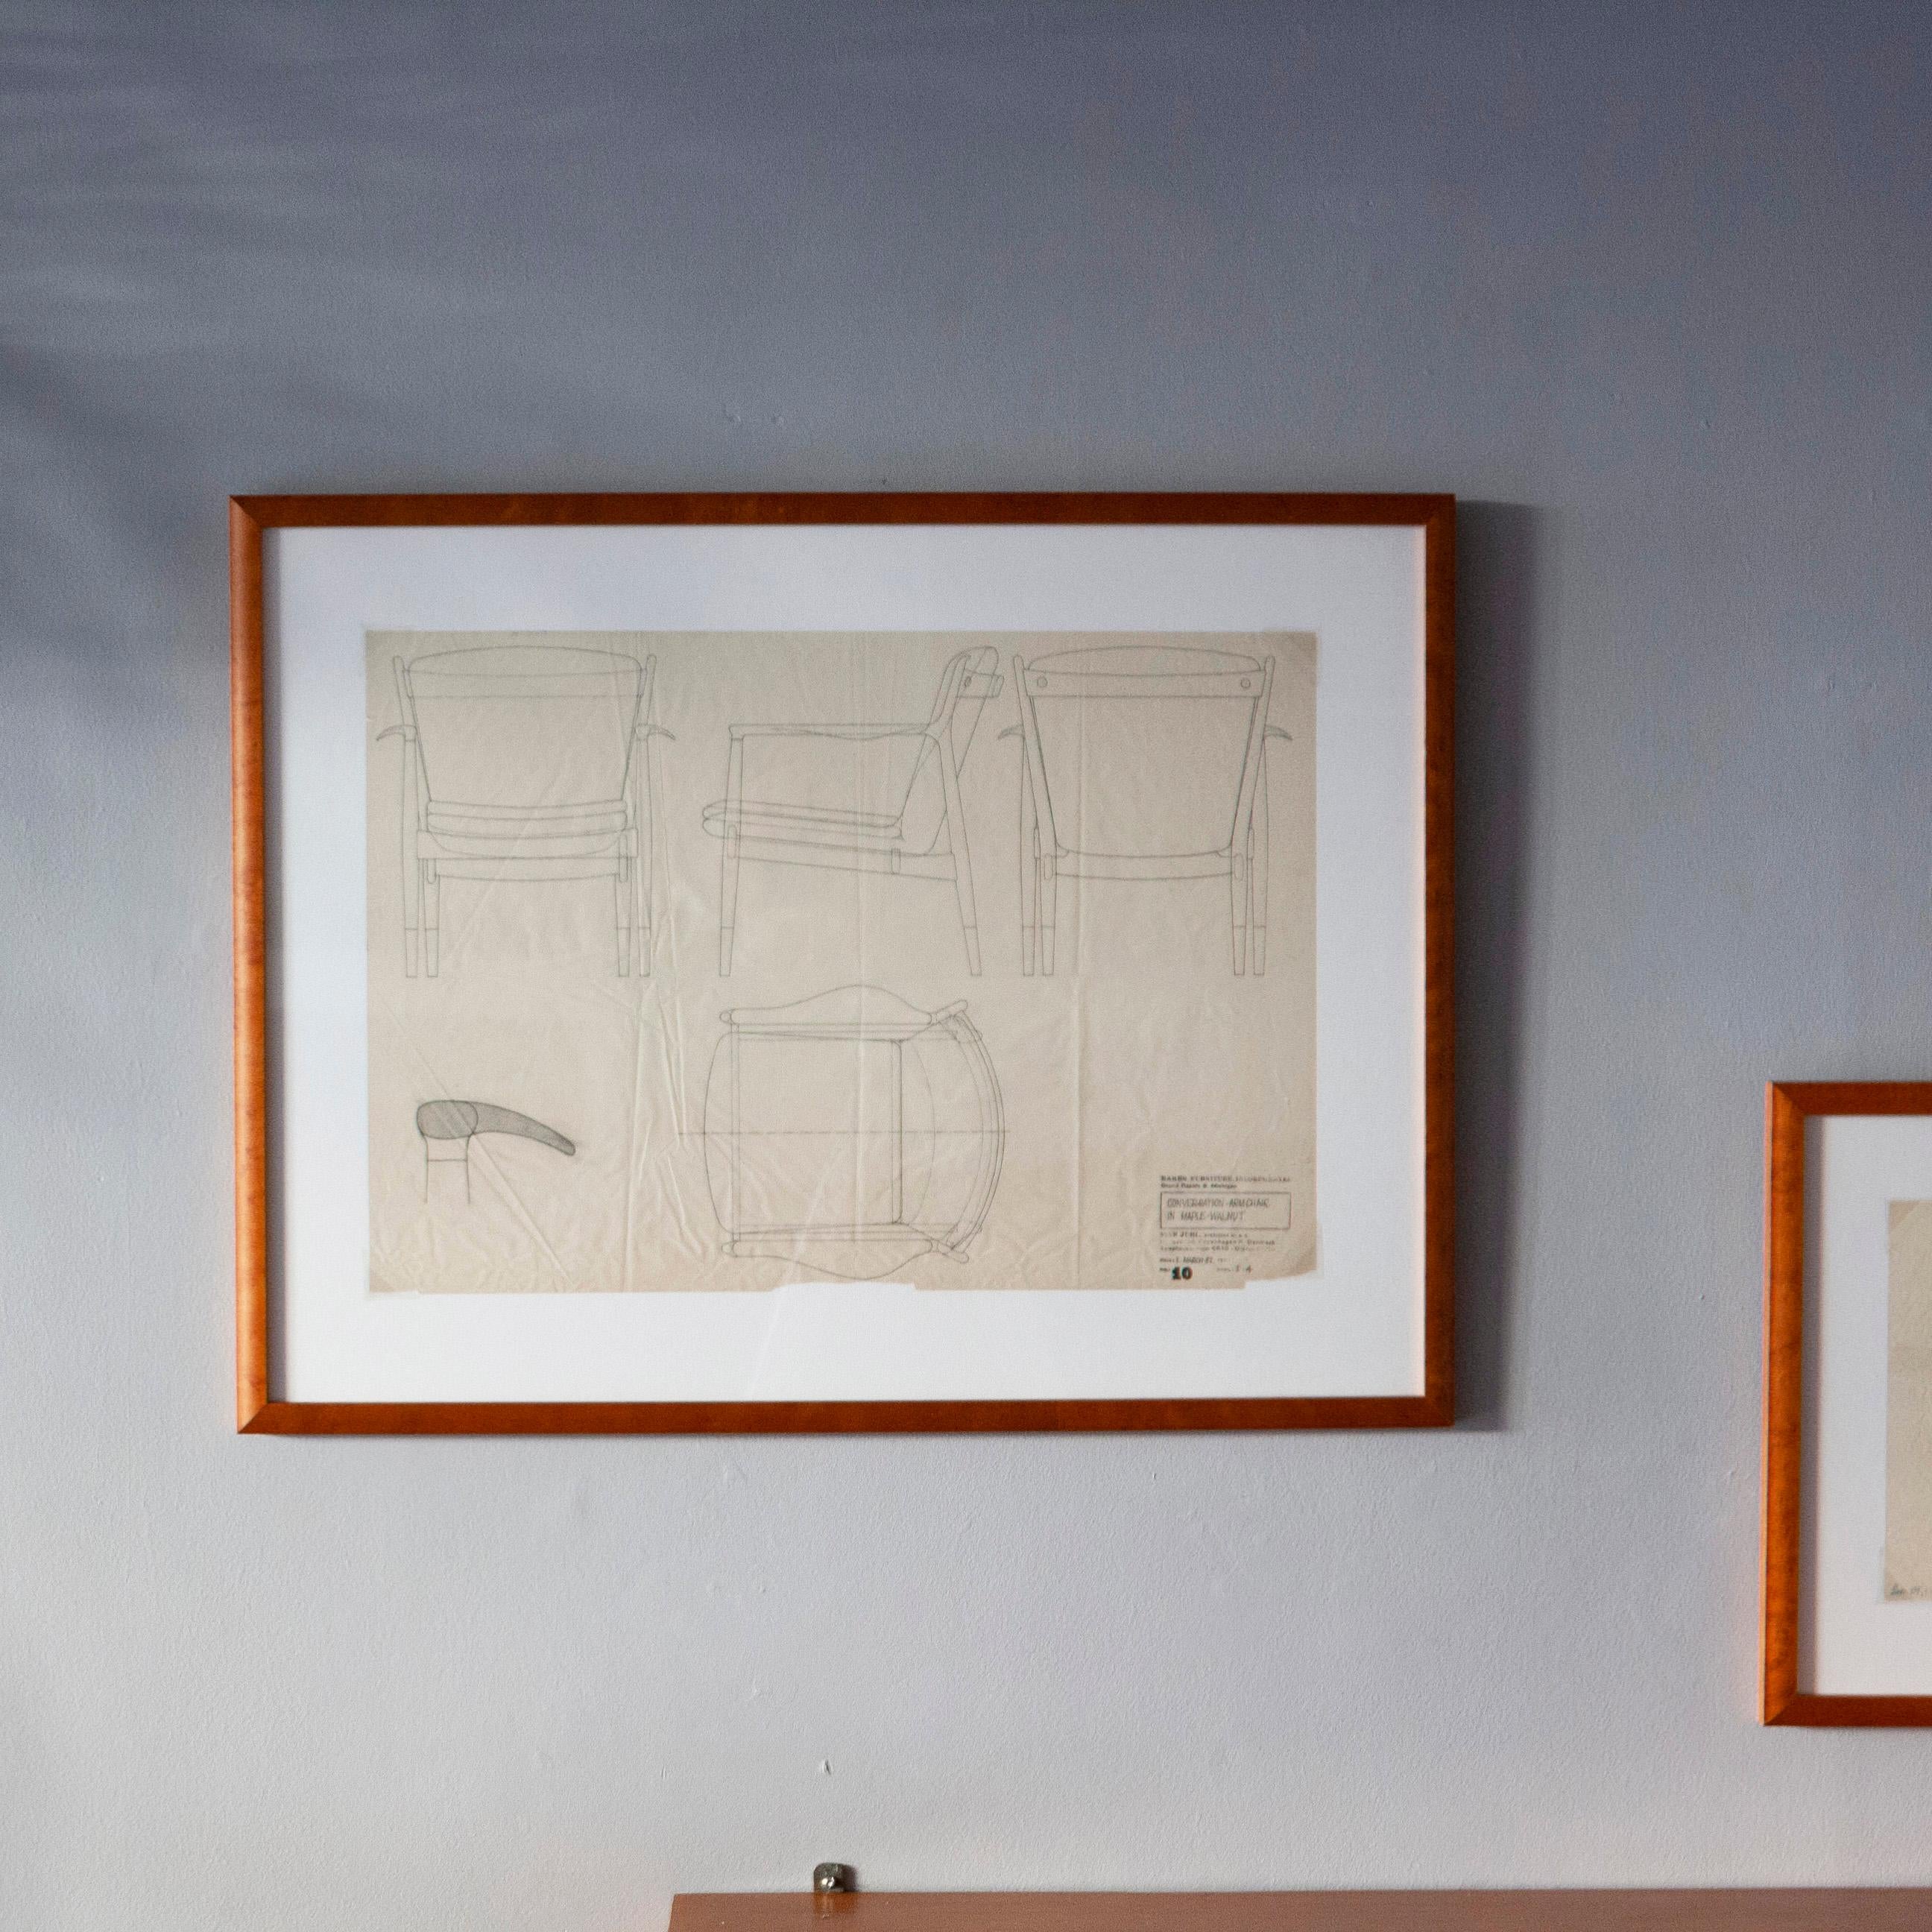 This is an example of a hand-drawn 1:4 scale orthographic drawing of the ‘Conversation Armchair in Maple-Walnut’, 1st March, 1951 by Finn Juhl. The drawings depicts the font view, side on, back, top view and the detail of the armrest.The drawings